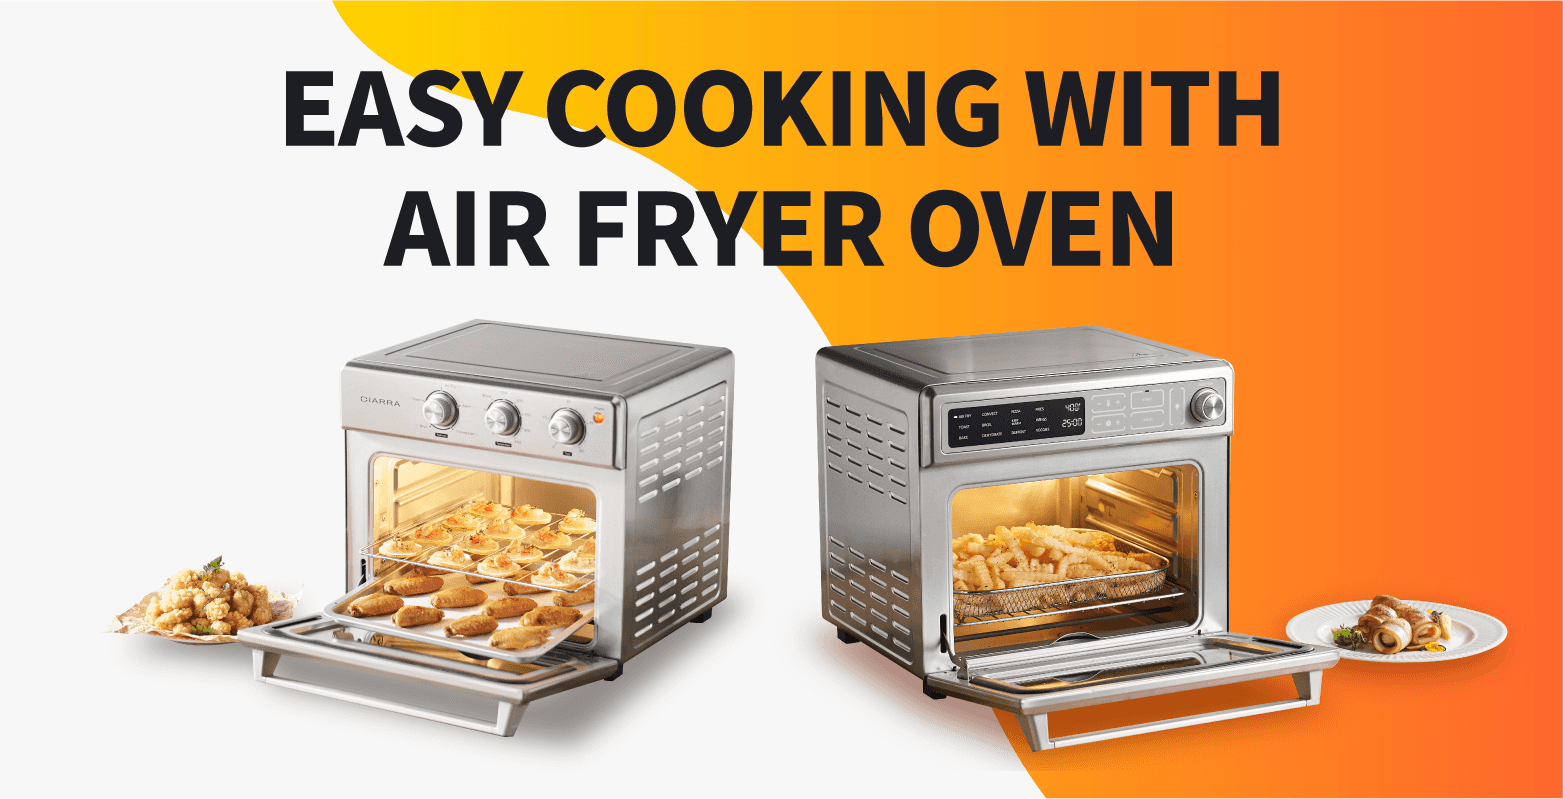 CIARRA High Quality Oil Free Air Fryer Oven